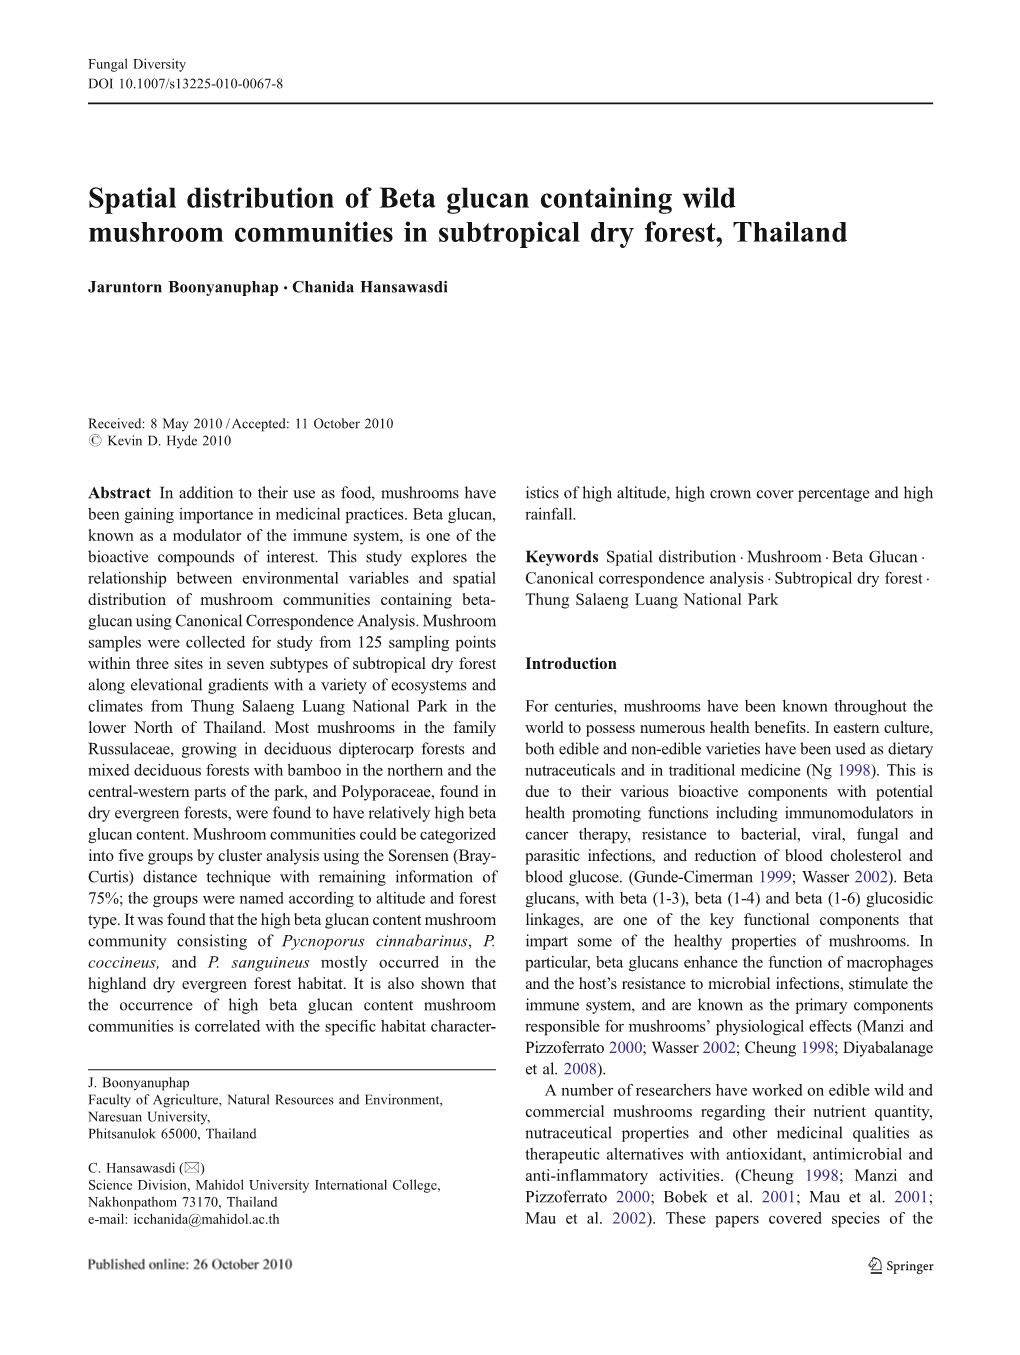 Spatial Distribution of Beta Glucan Containing Wild Mushroom Communities in Subtropical Dry Forest, Thailand